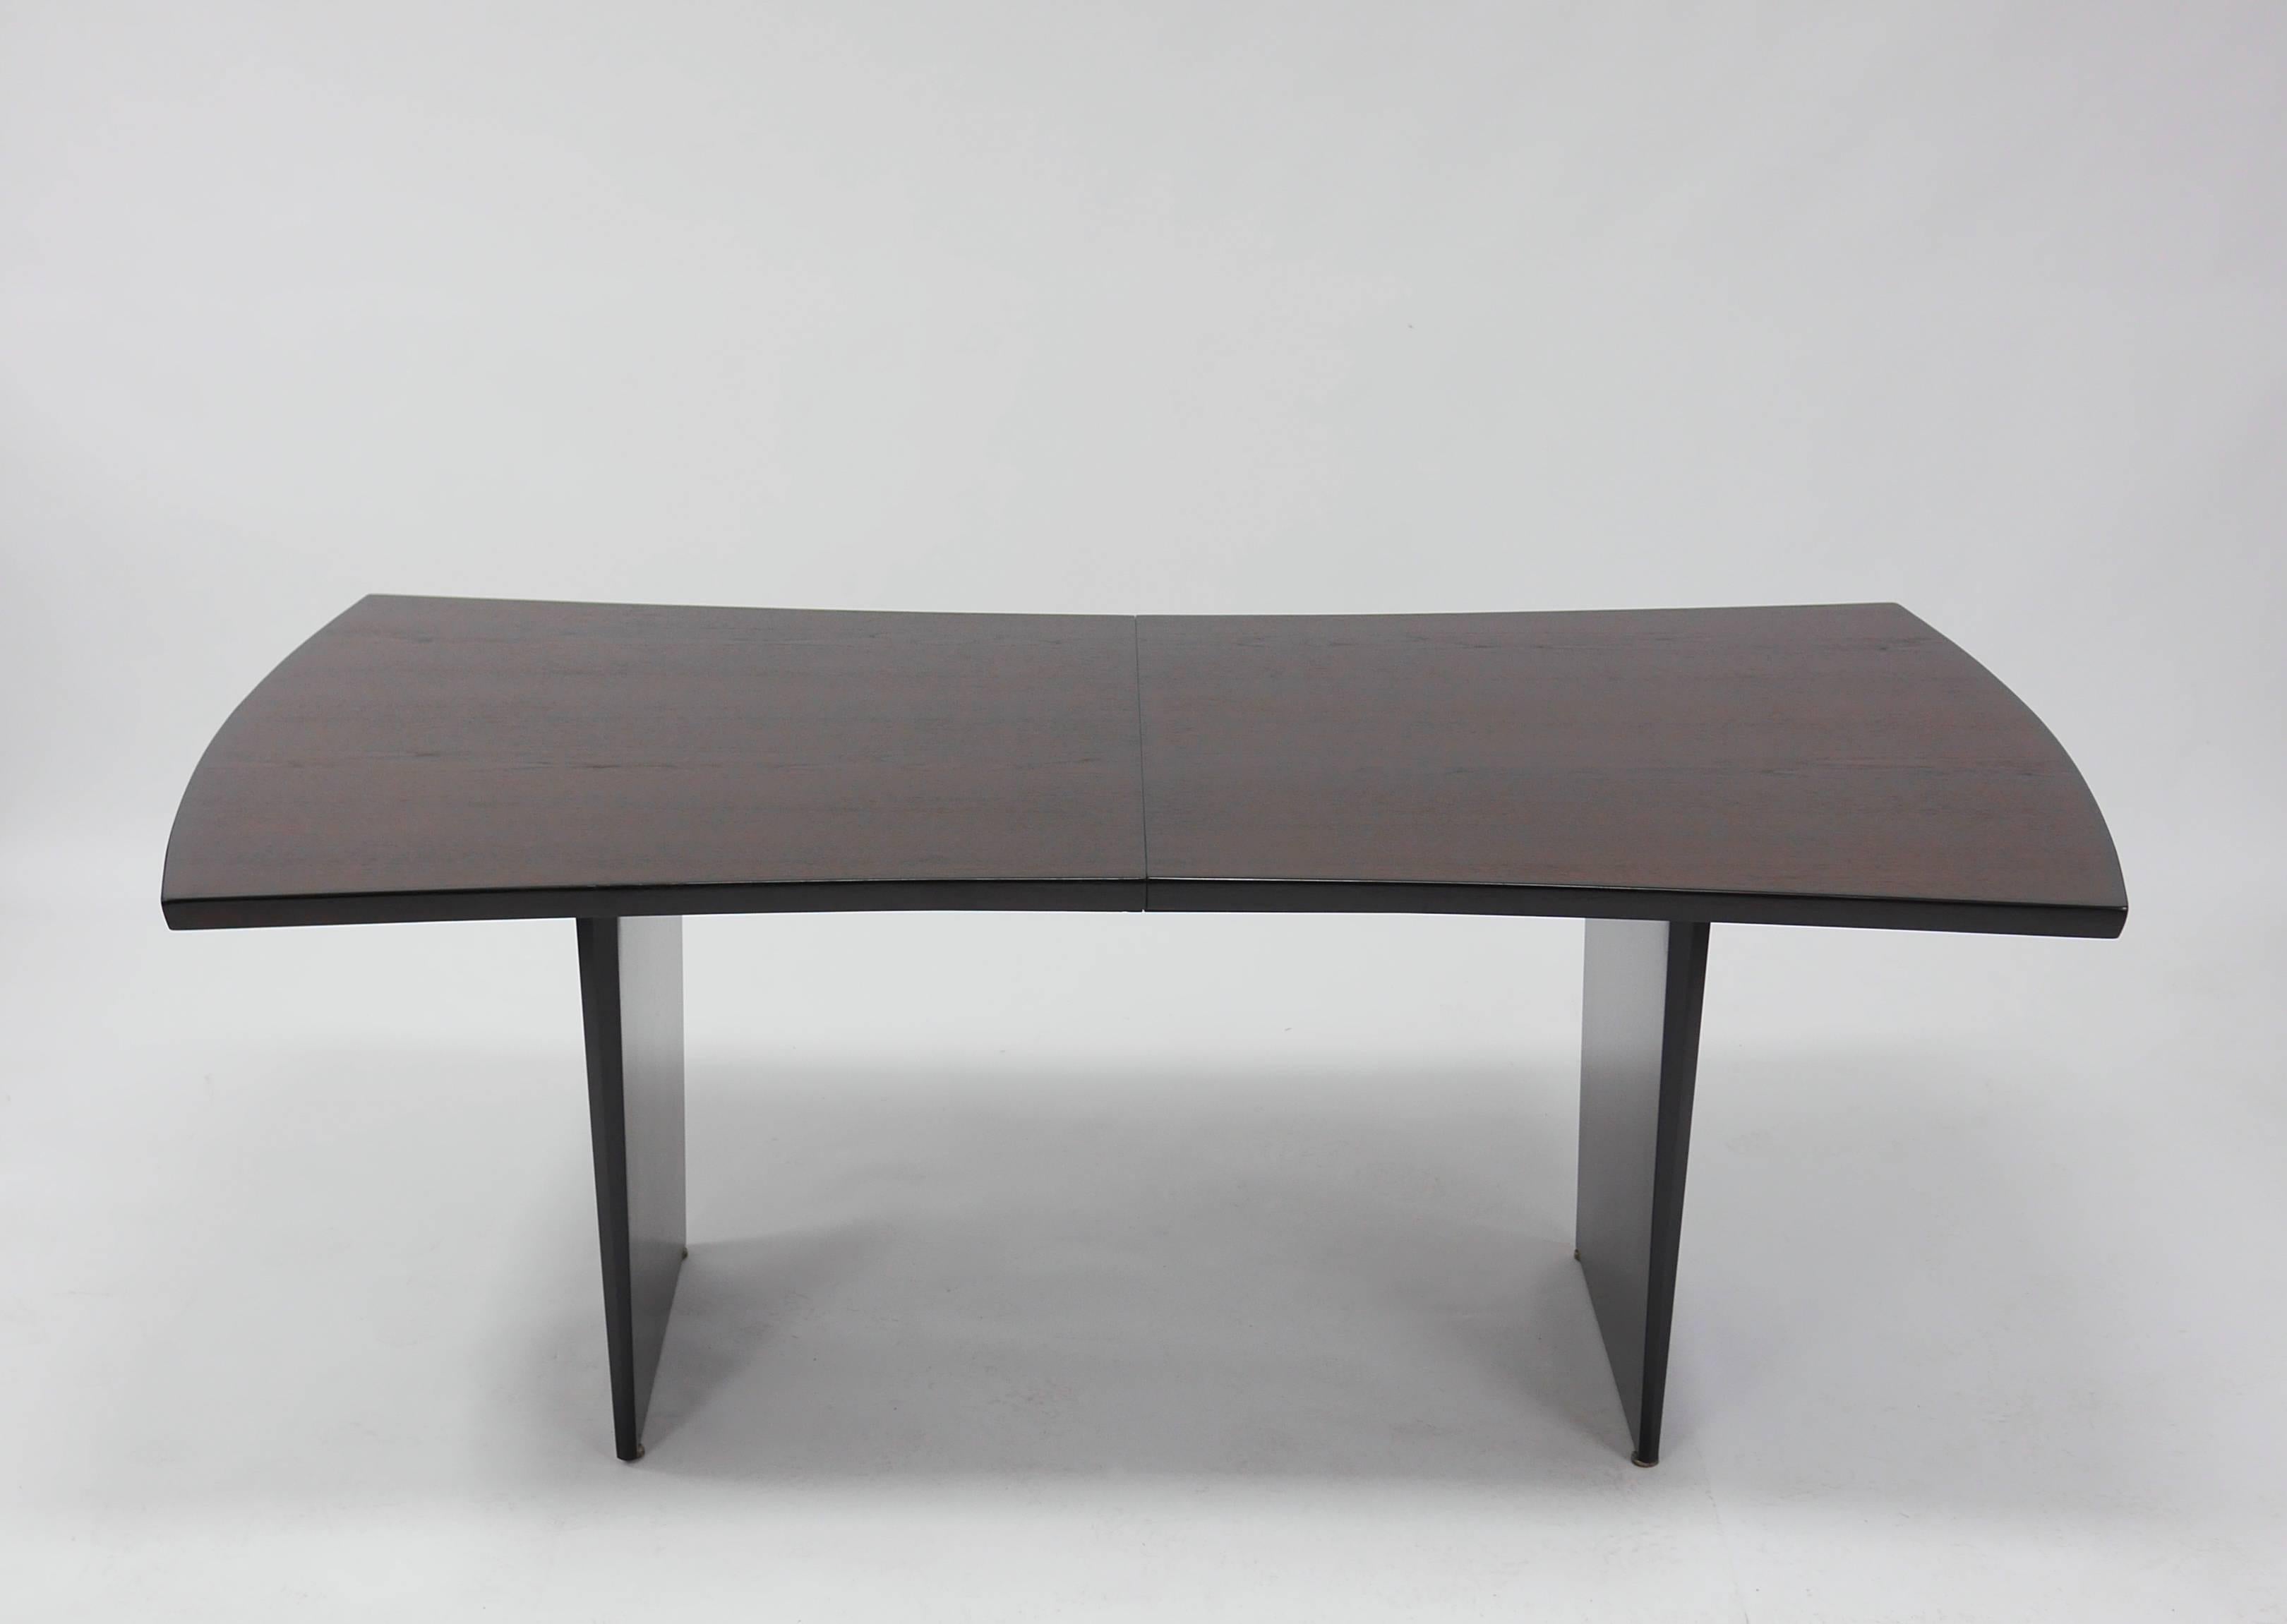 Bow tie dining table by Harvey Probber. Elegant, well made and very solid.
Walnut top with beveled edge banding, on 2 slab legs. Two tone lacquer top, the edge banding deep brown, the top Walnut.